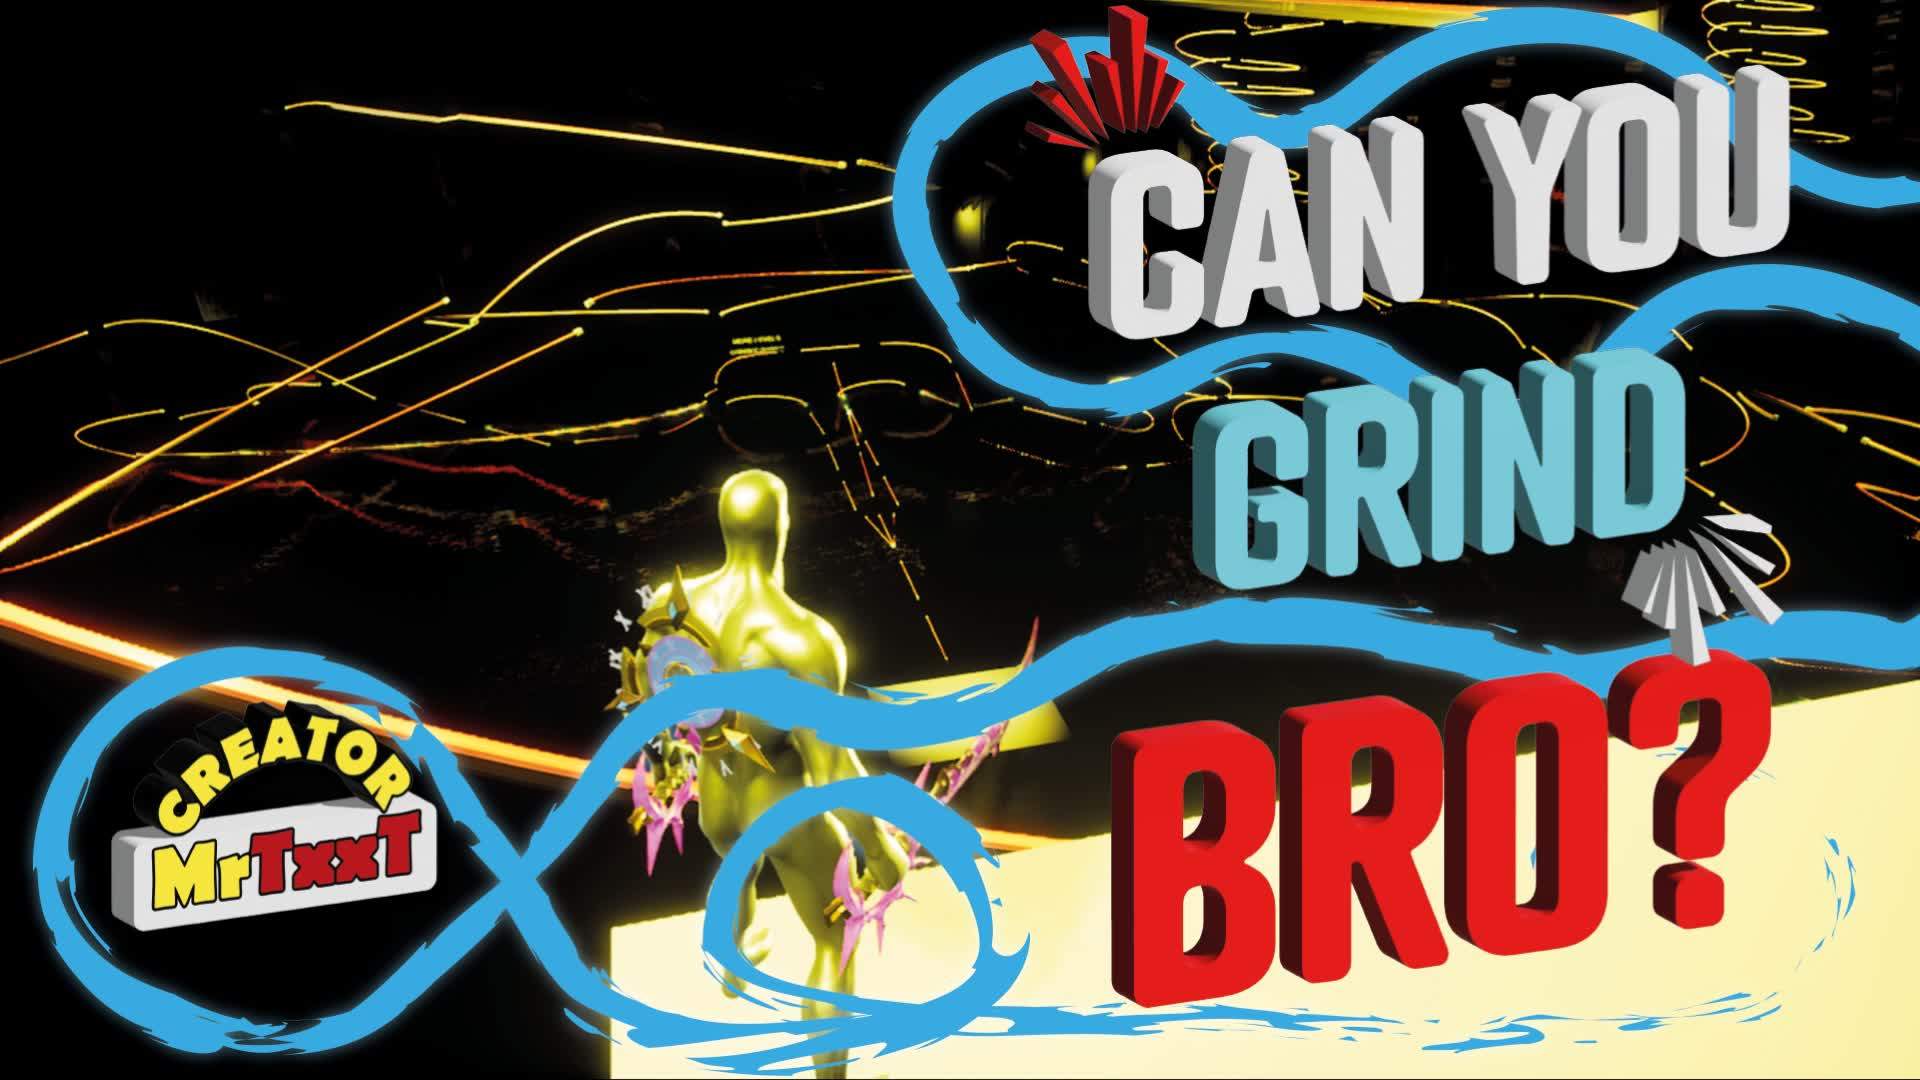 Can You Grind BRO???